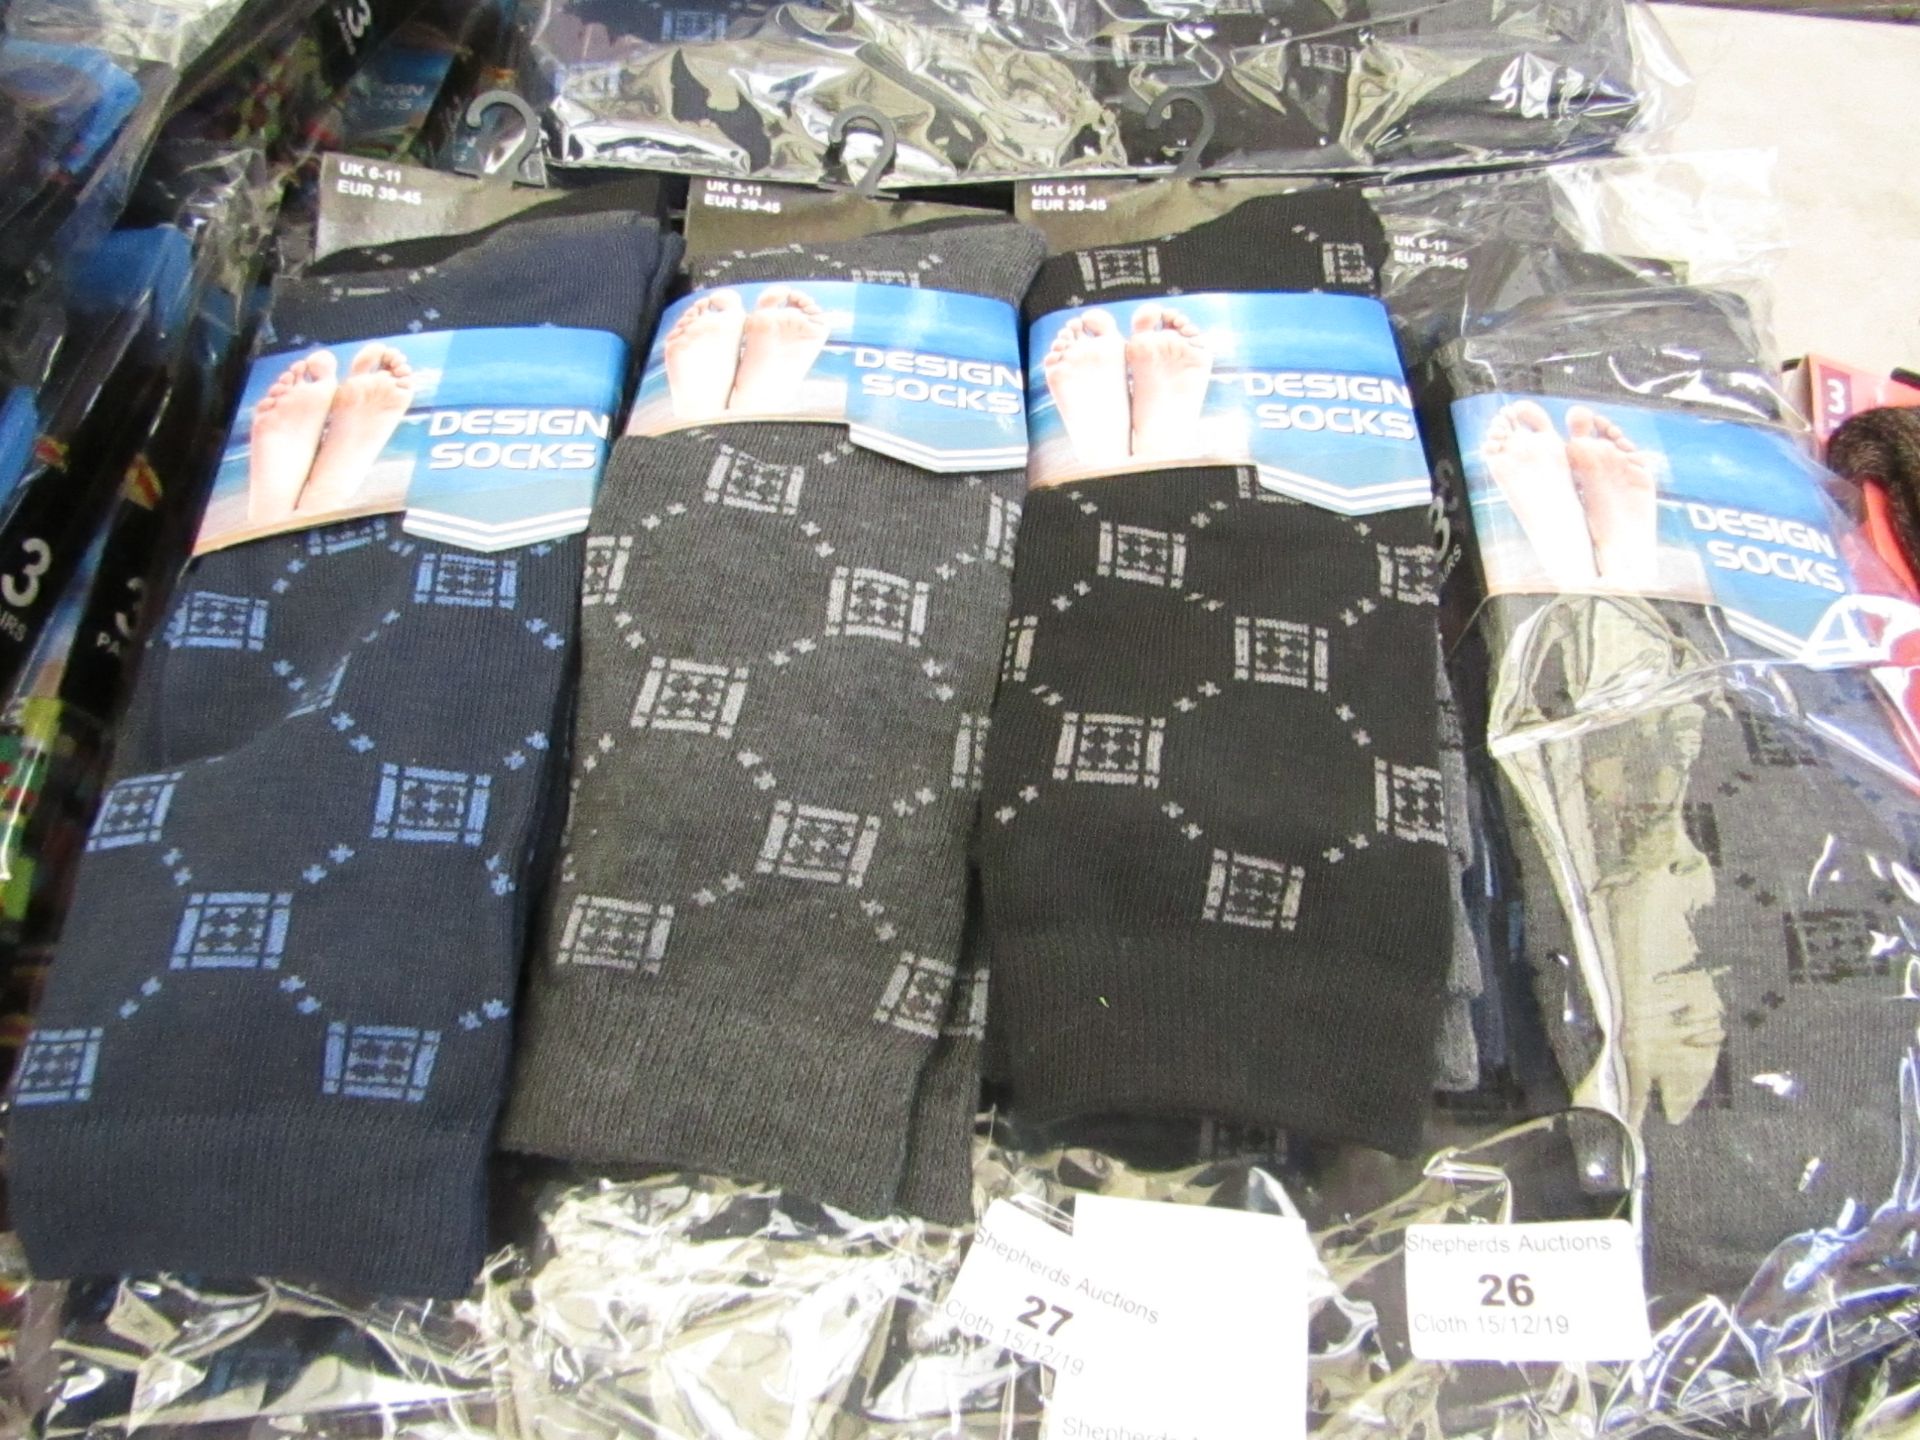 Pack of 12 pairs Mens Design Socks Grey, Navy & Black, size 6-11 all new in packaging